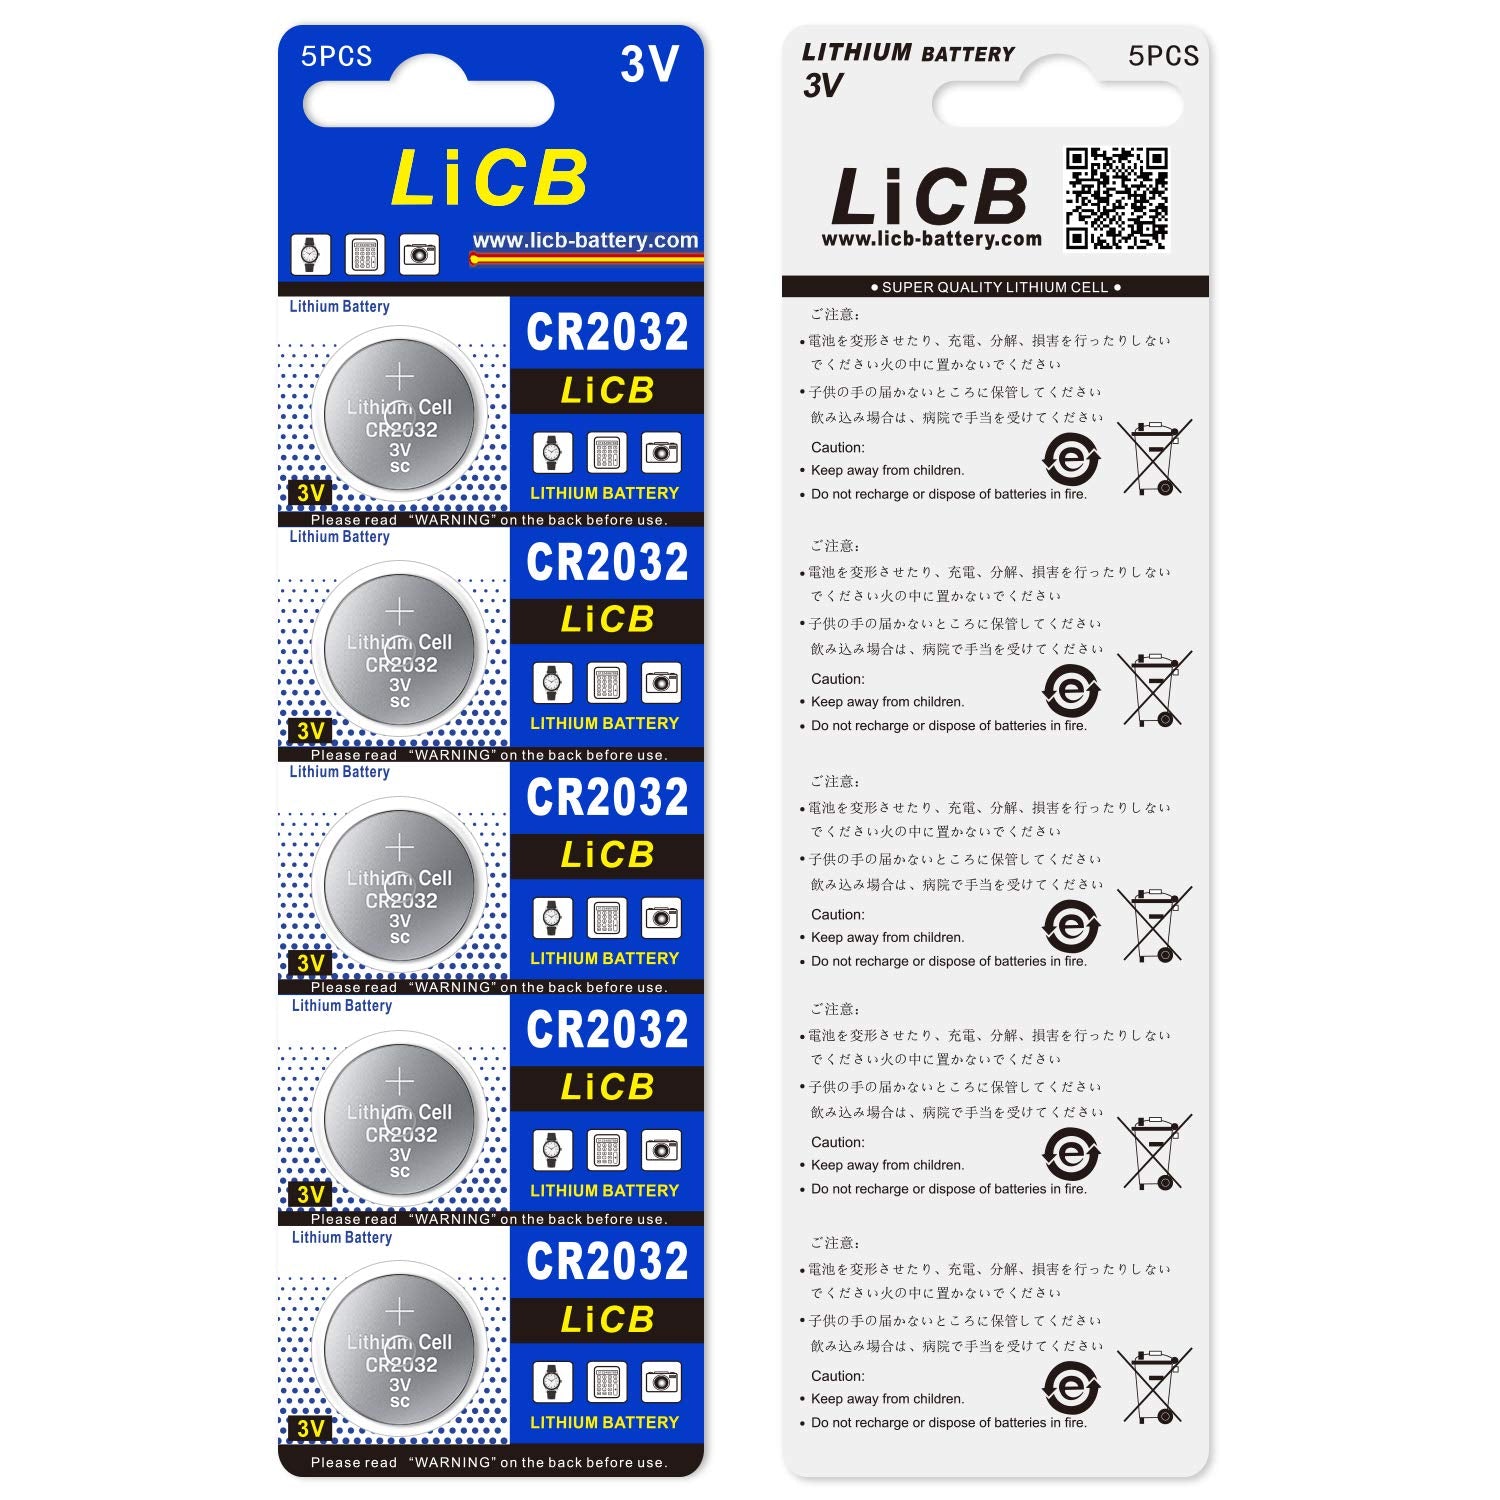 LiCB 20 PCS CR2032 Lithium Coin Battery- 240mAh Ultra High Capacity with Powerful 3V Output, Specialty Technology for tv remote,car fob,motherboard,Calculators and More(2032/DL2032)